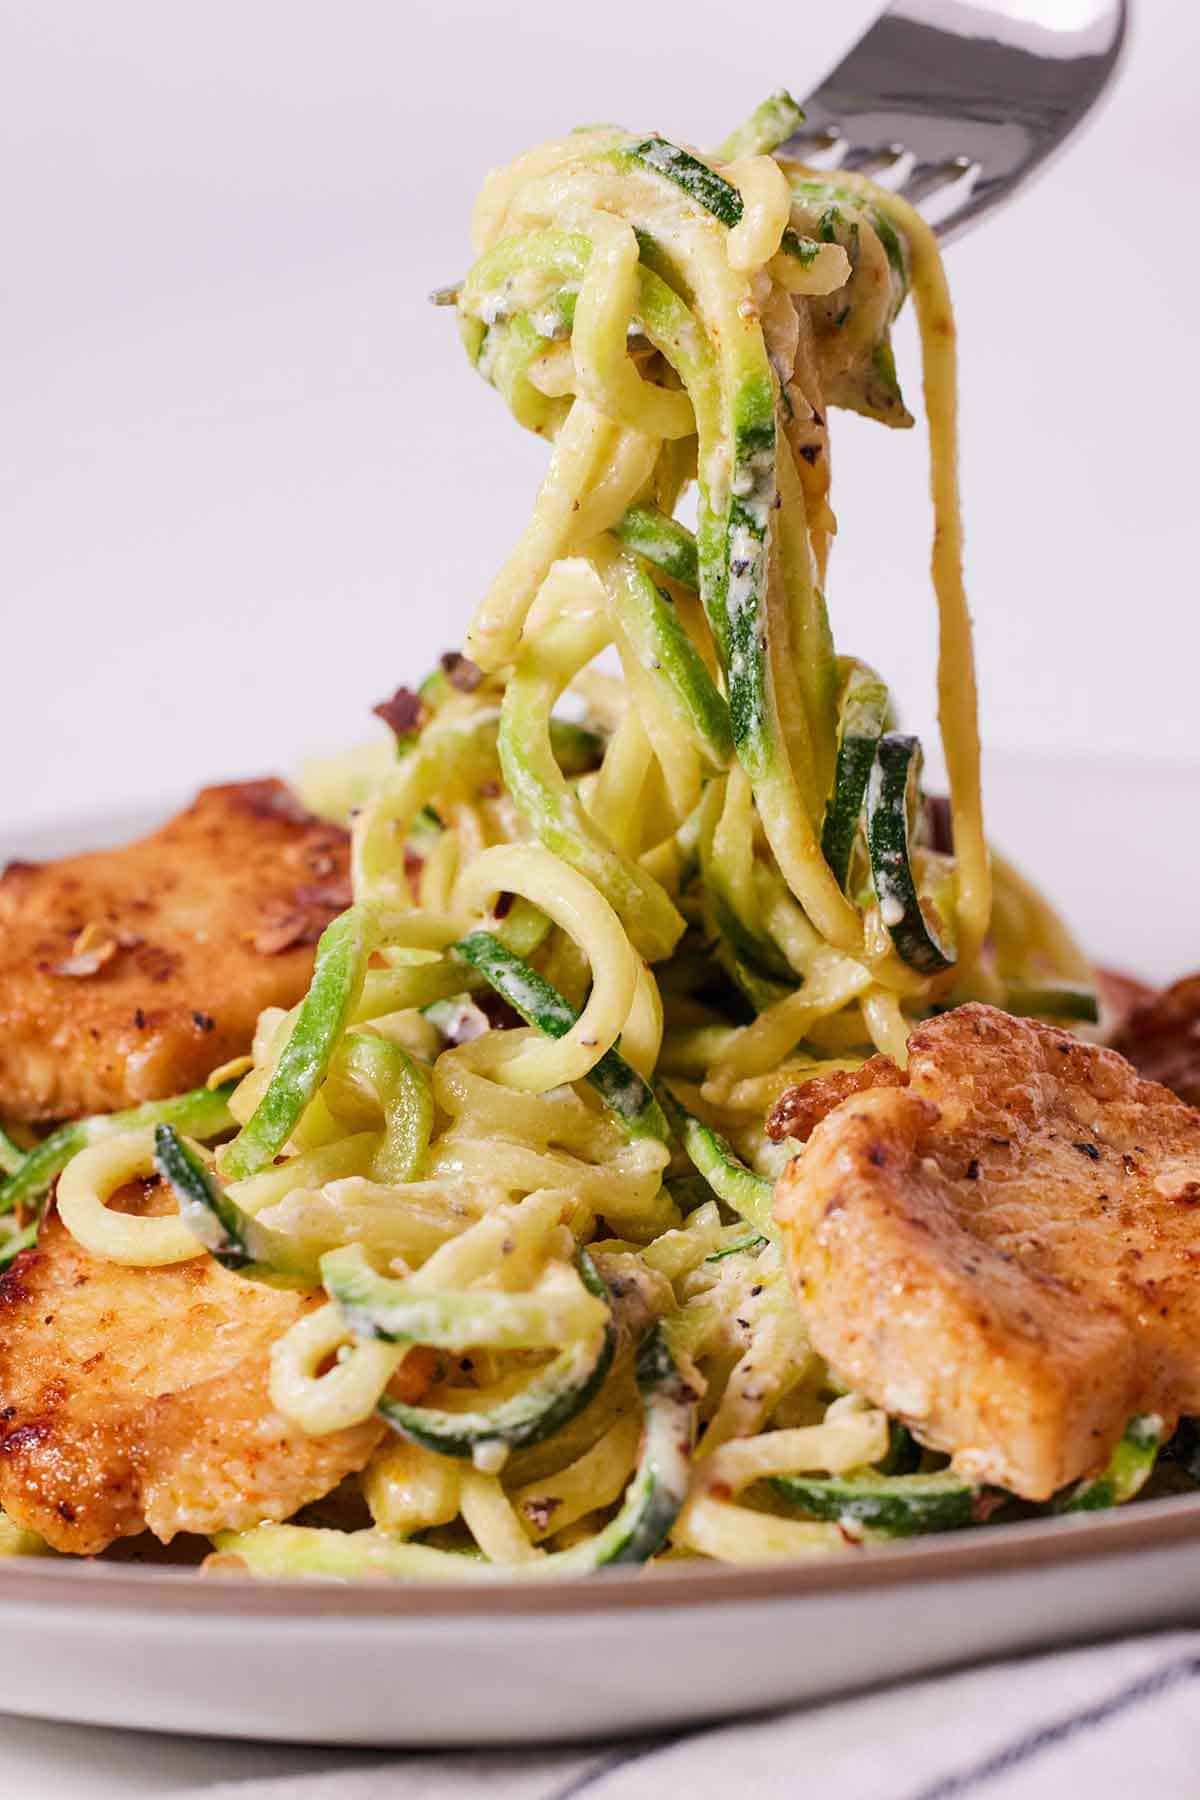 A forkful of zucchini noodles lifted from a plate of chicken Alfredo.